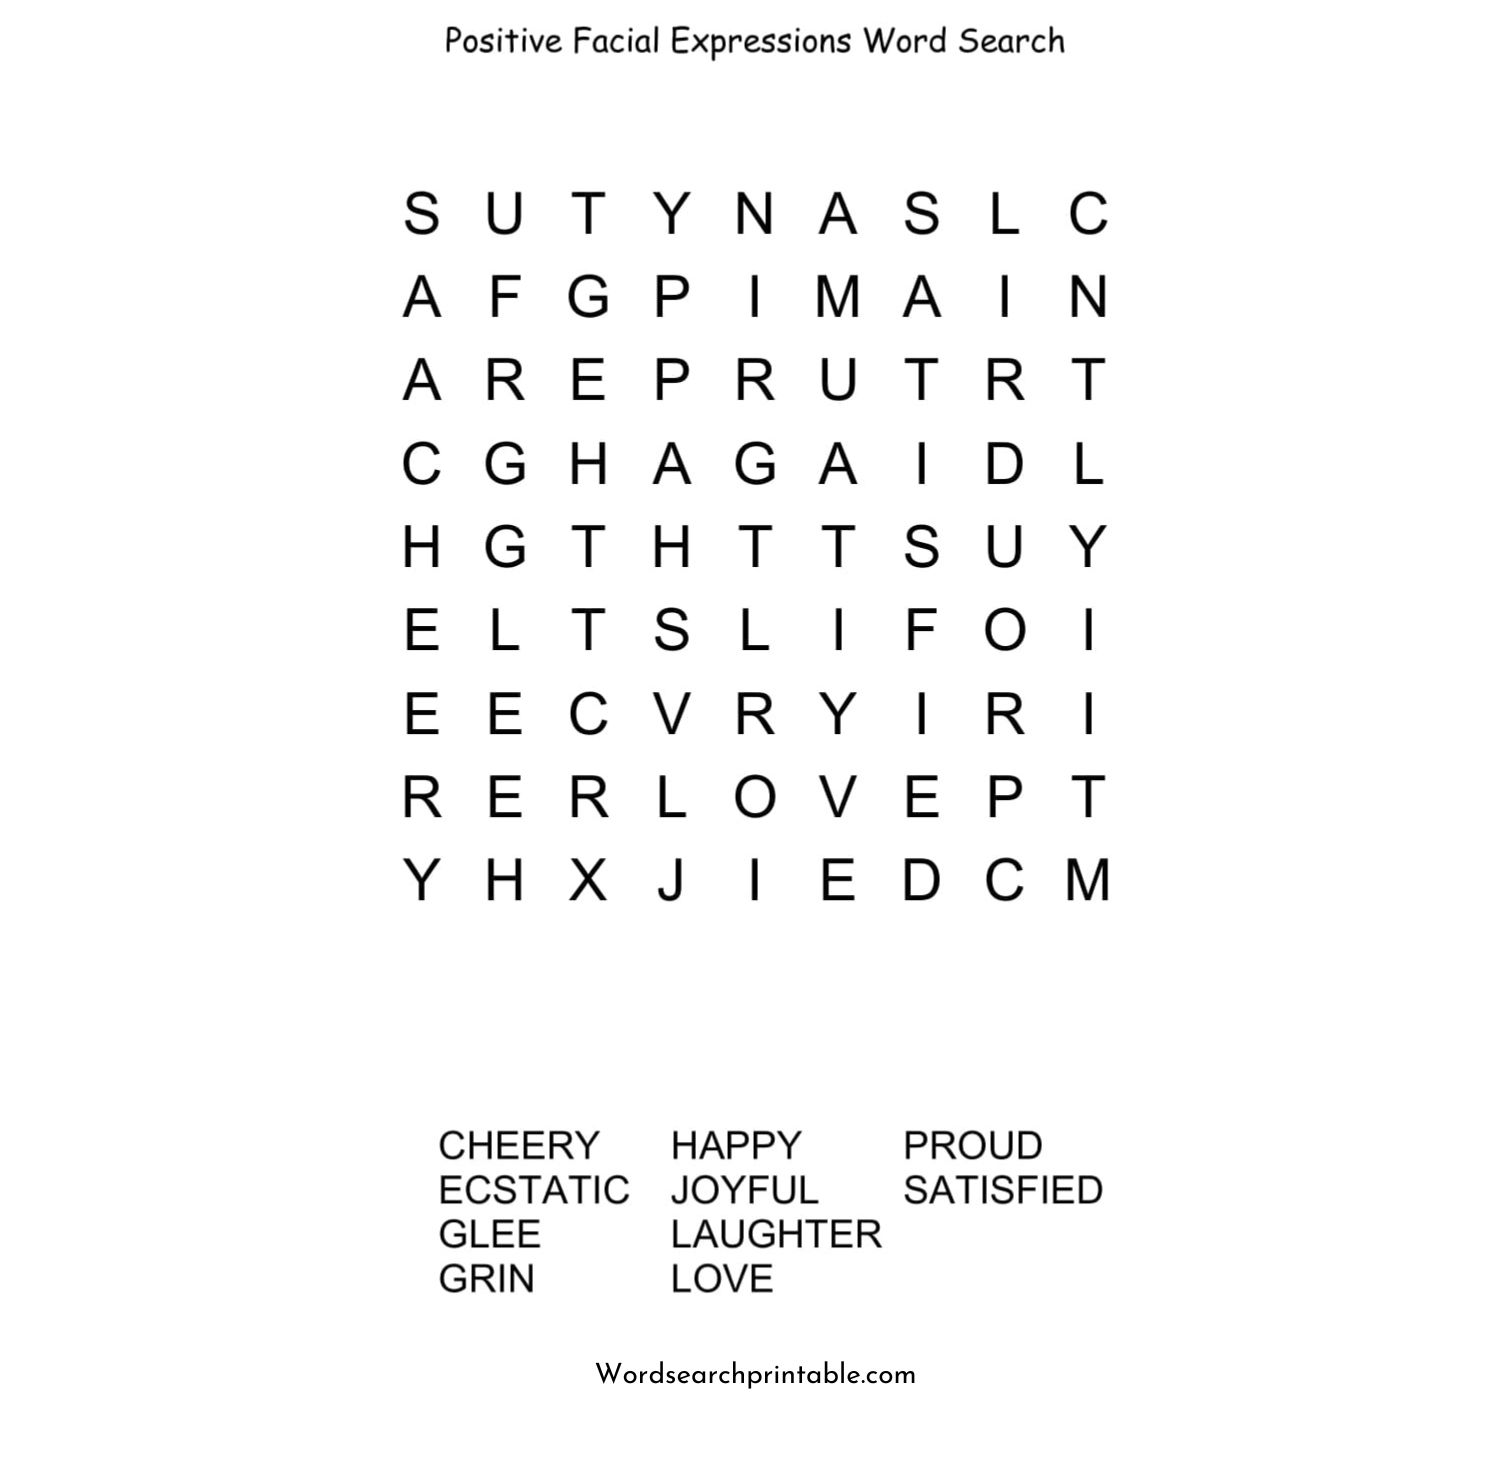 positive facial expressions word search puzzle